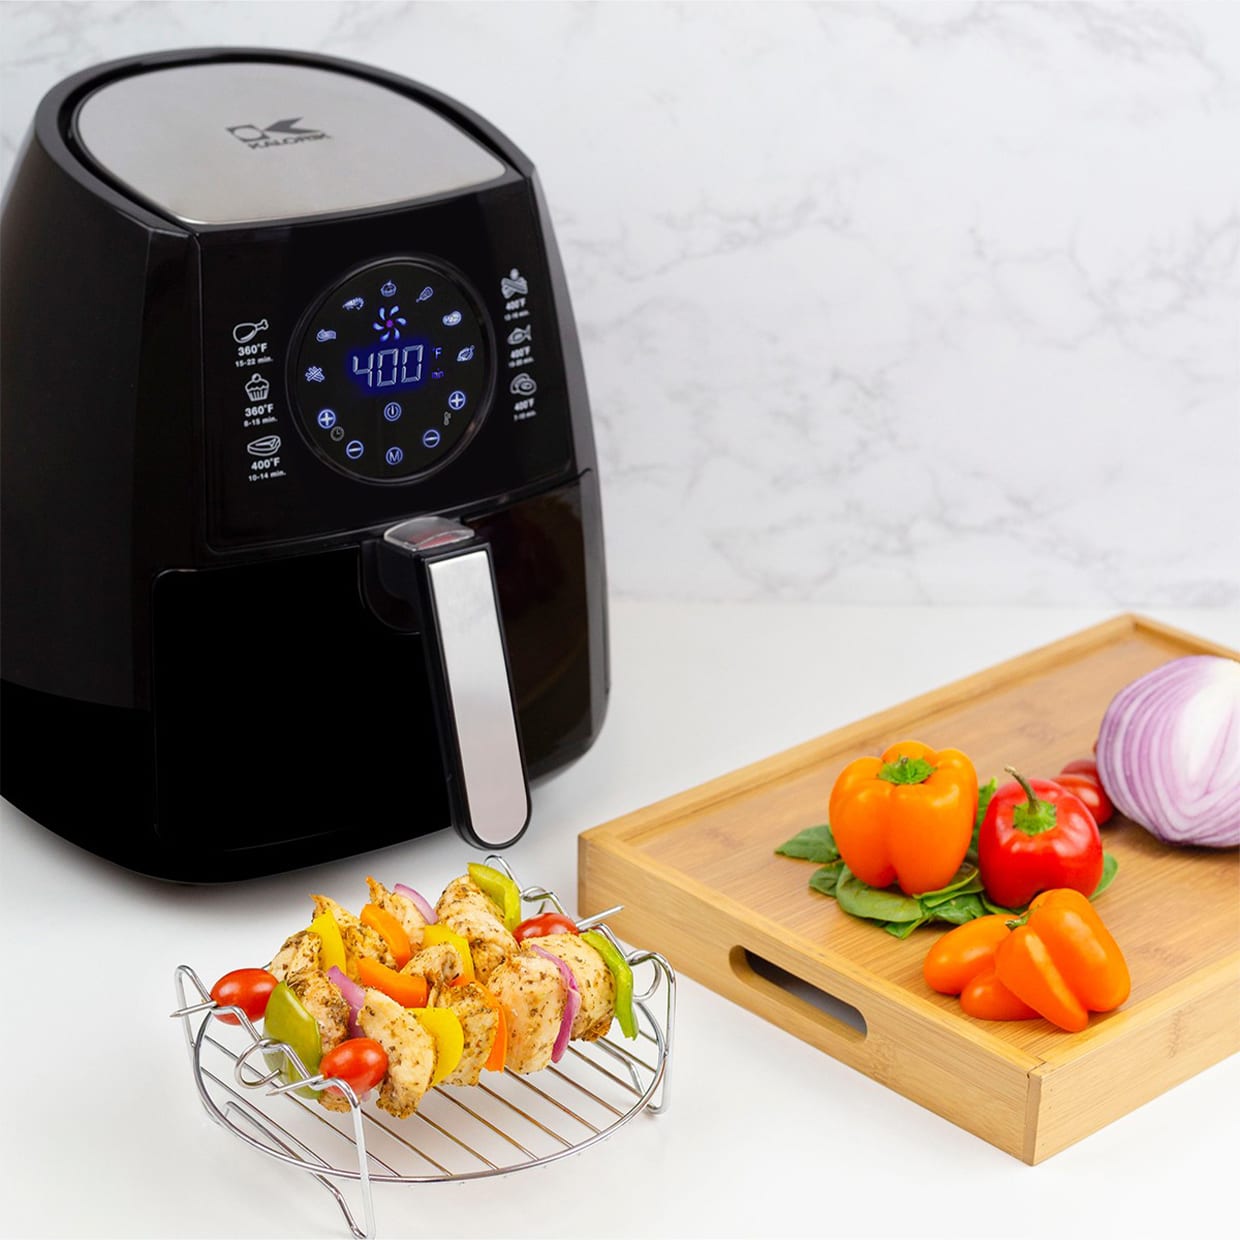 A black air fryer next to a rack and tray of vegetables.